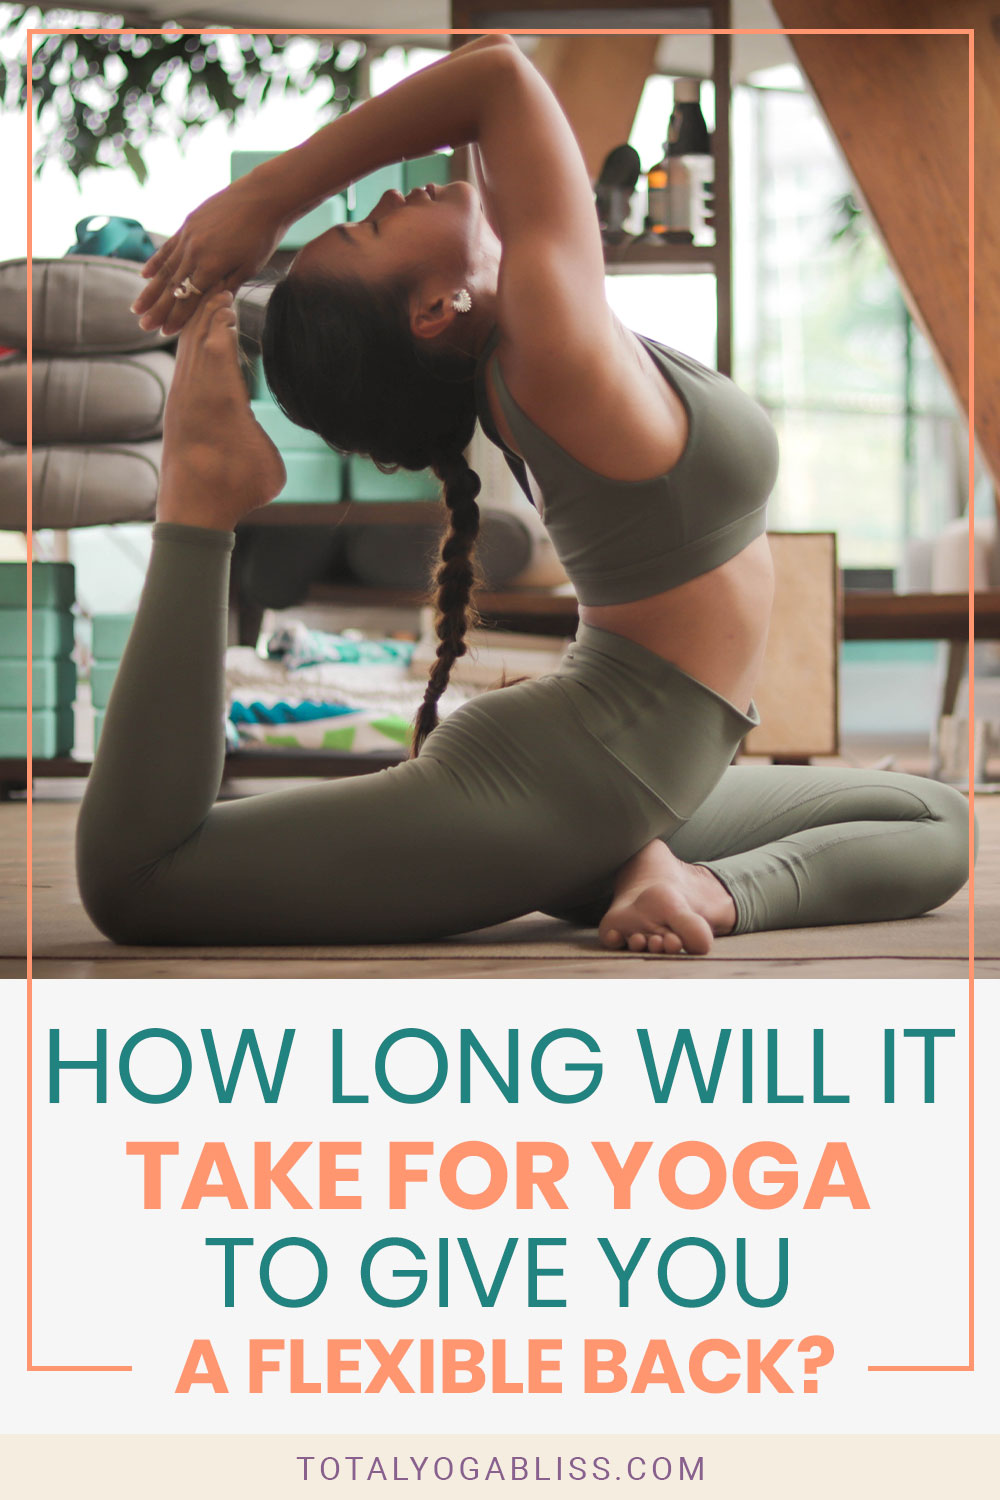 How Long Will it Take For Yoga to Give You a Flexible Back?